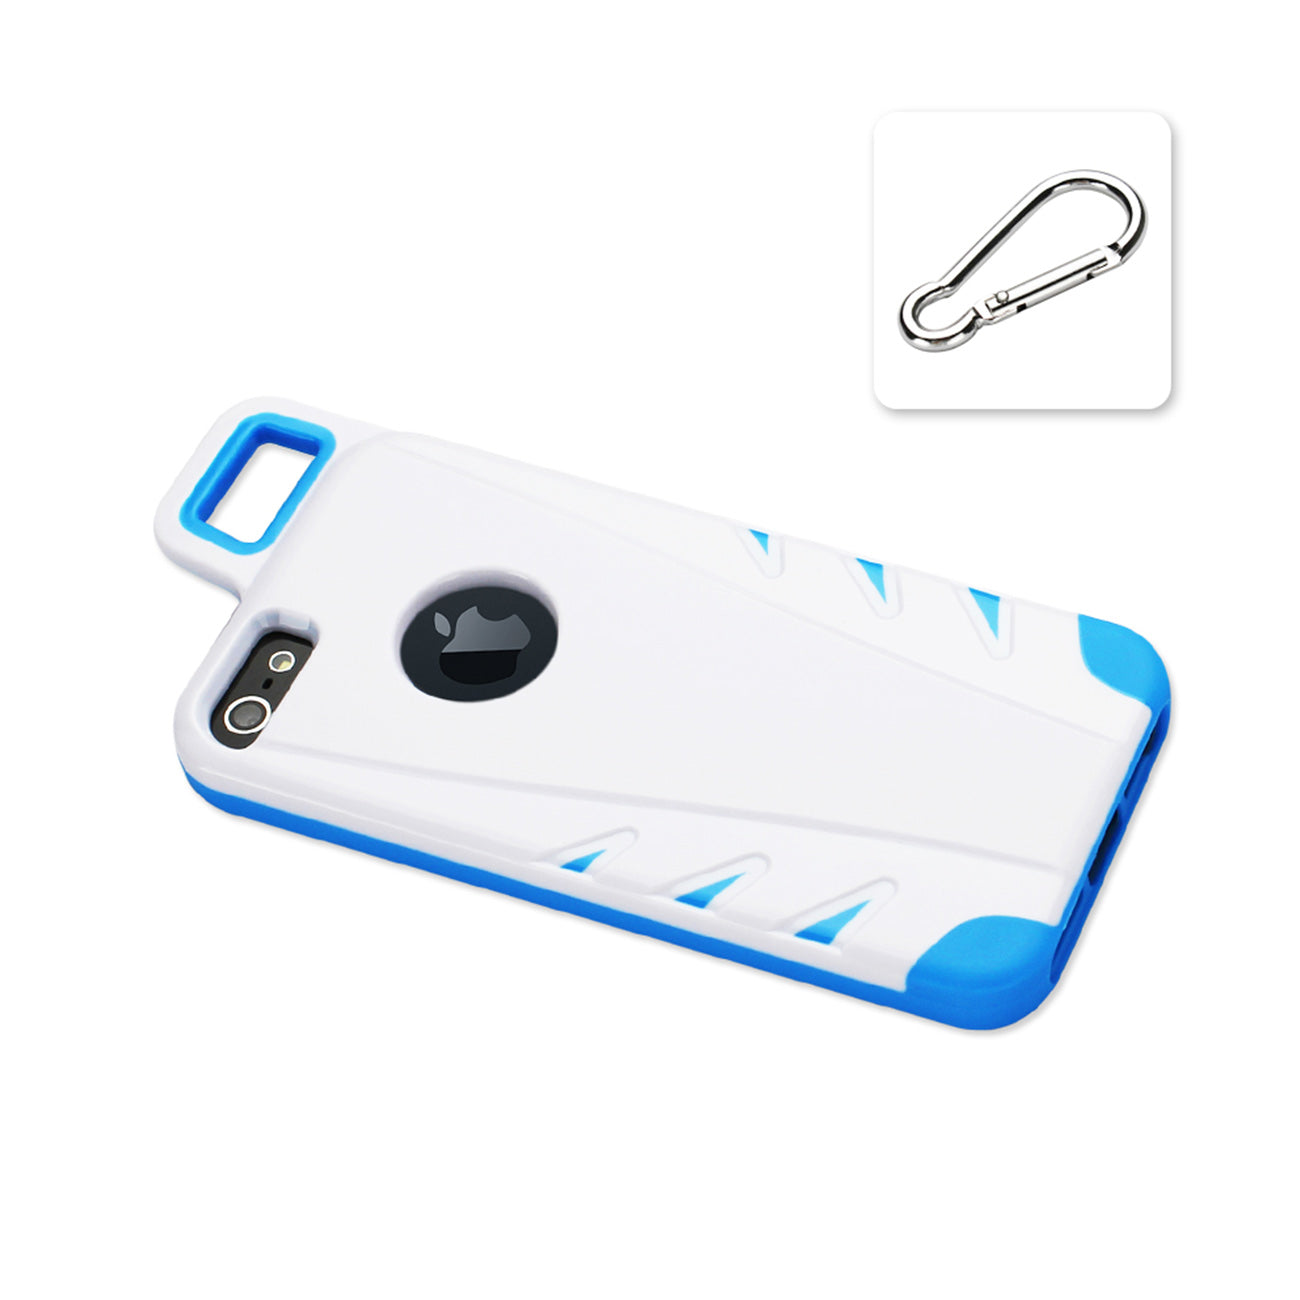 Case Hybrid Drop Proof Workout With Hook iPhone 5/ 5S/ SE White Navy Color